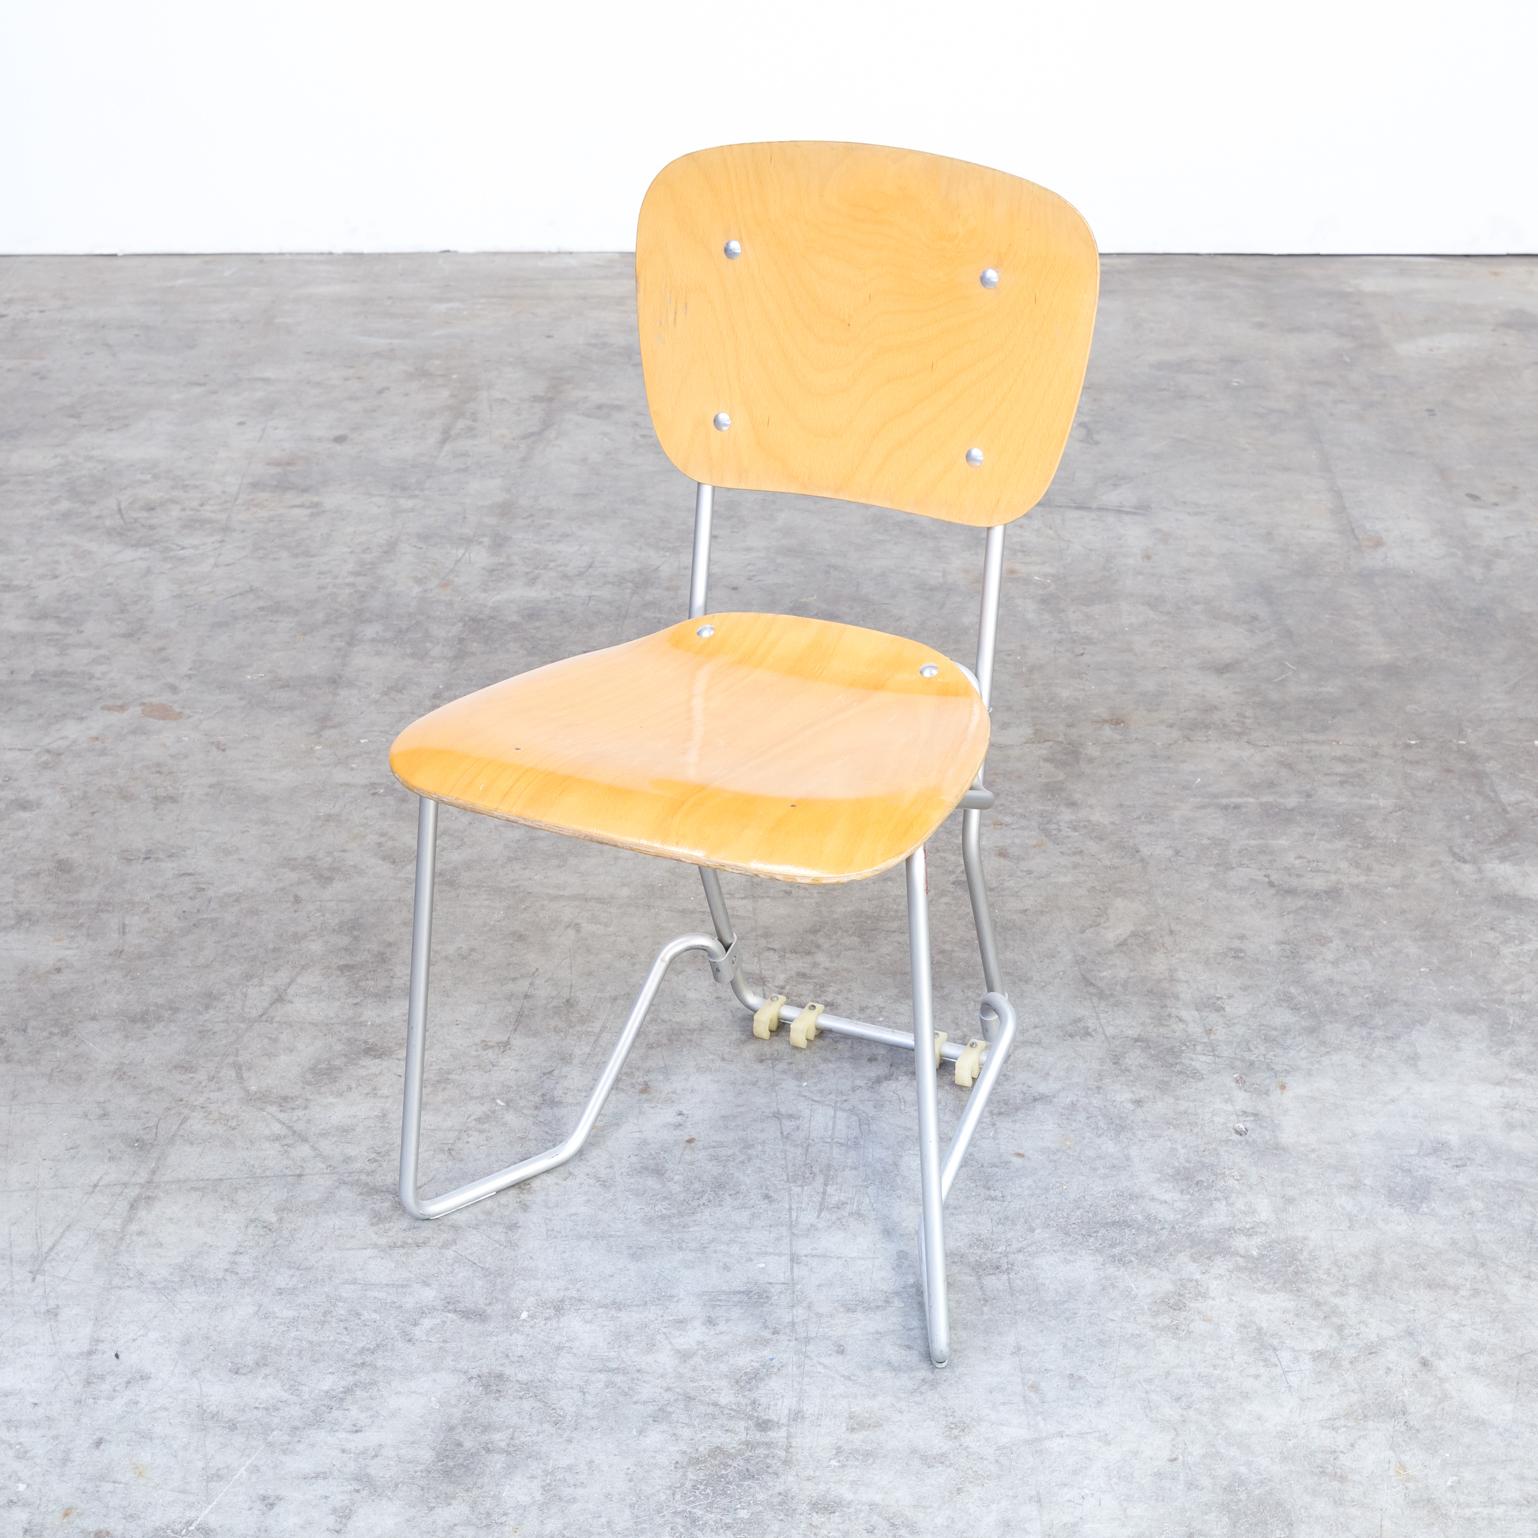 1950s Armin Wirth ‘aluflex’ Folding Chair for Hans Zollinger Sohre Set of 20 For Sale 10